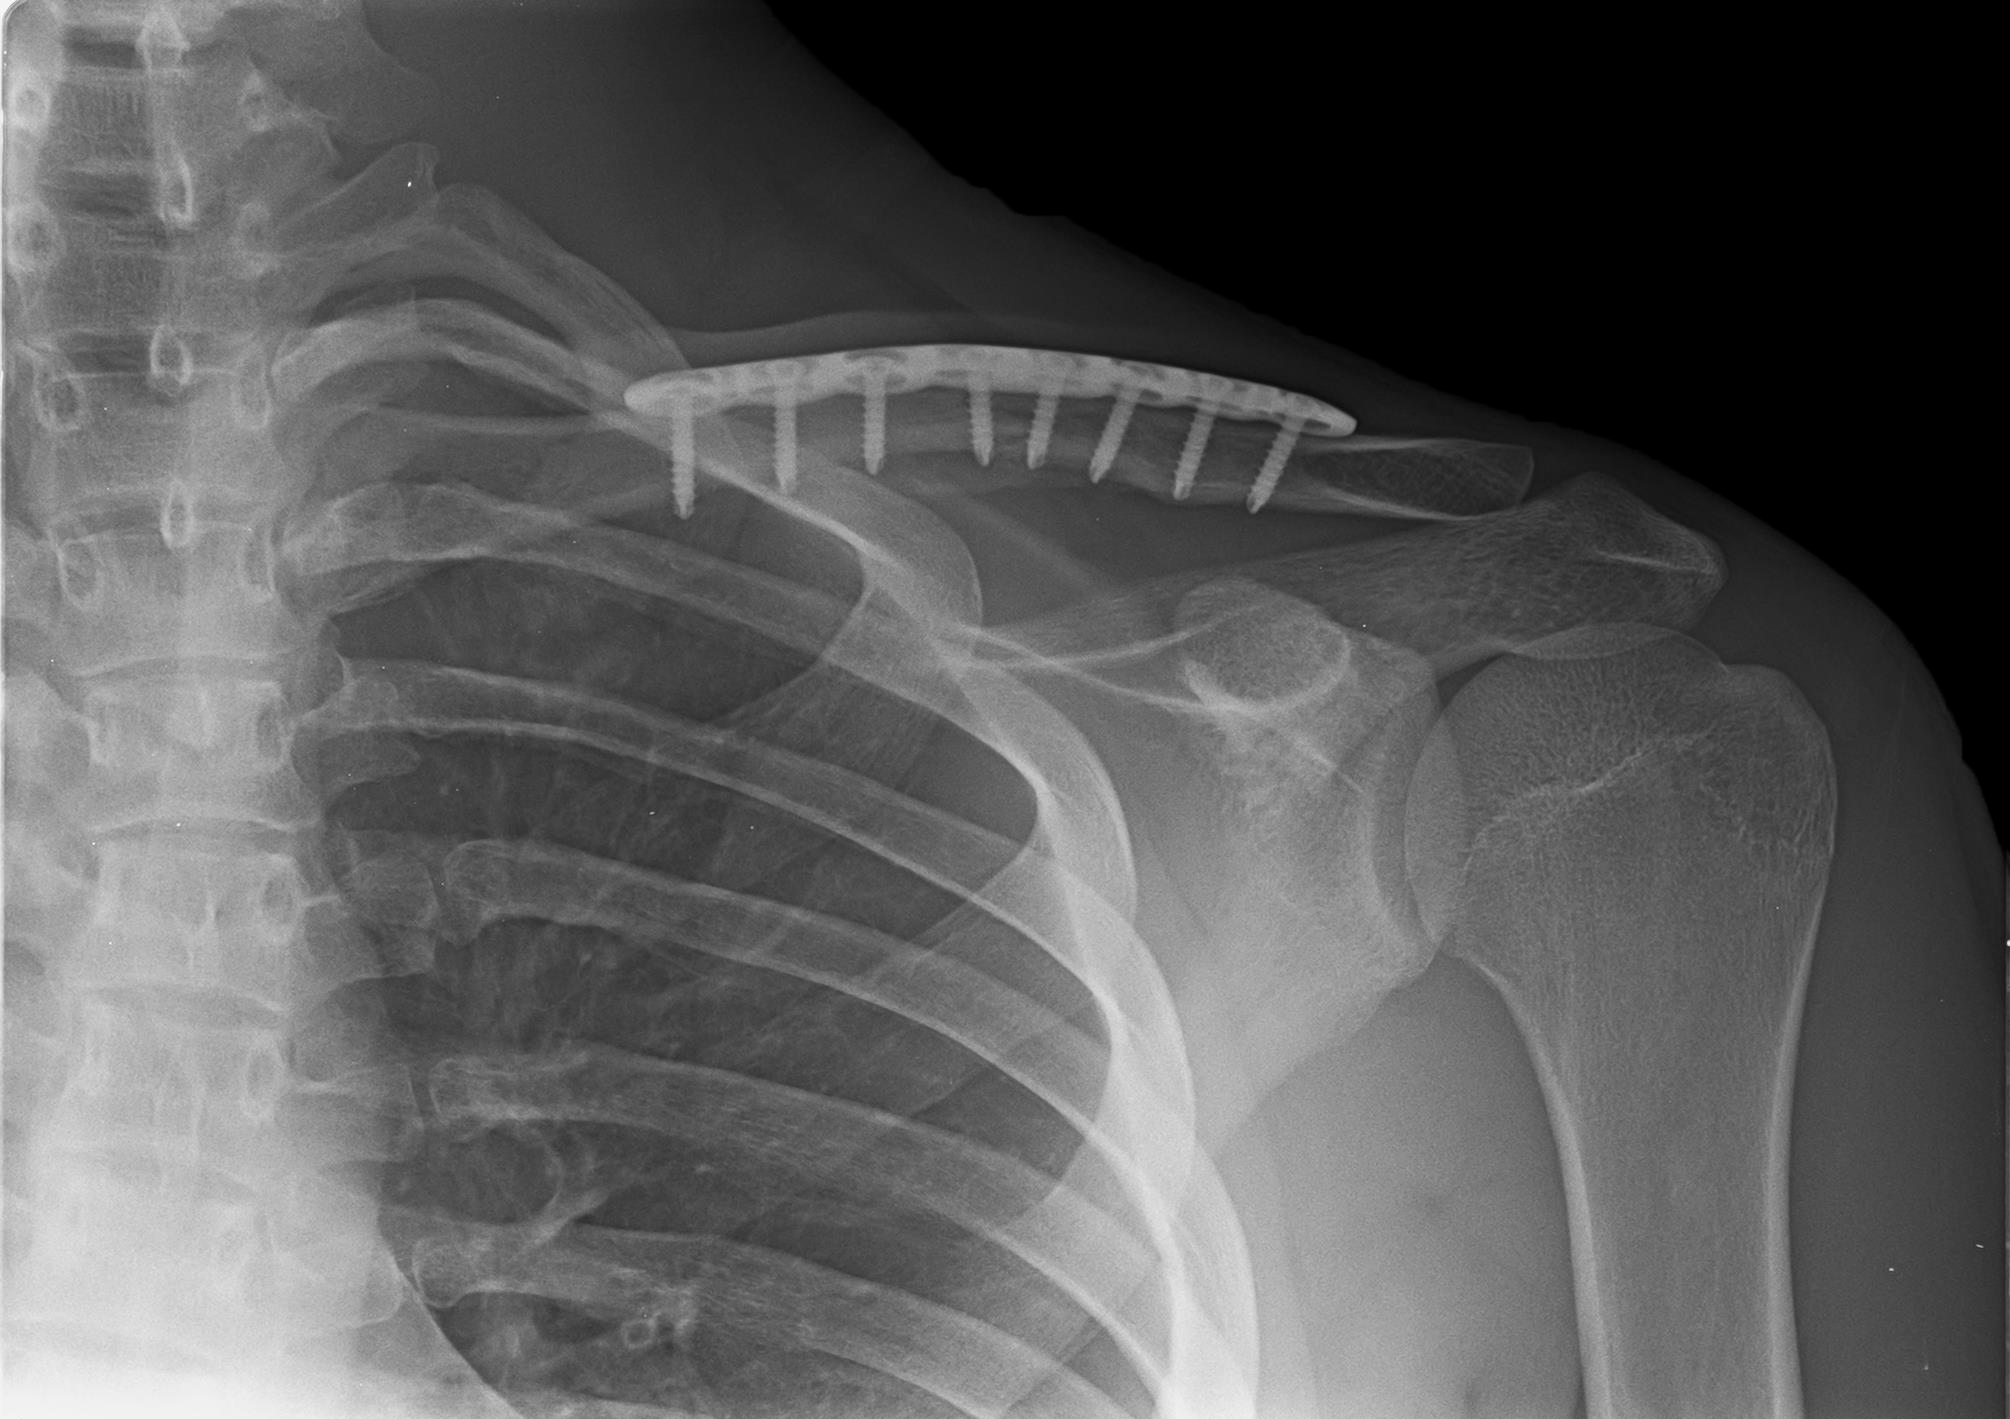 Clavicle-fracture after